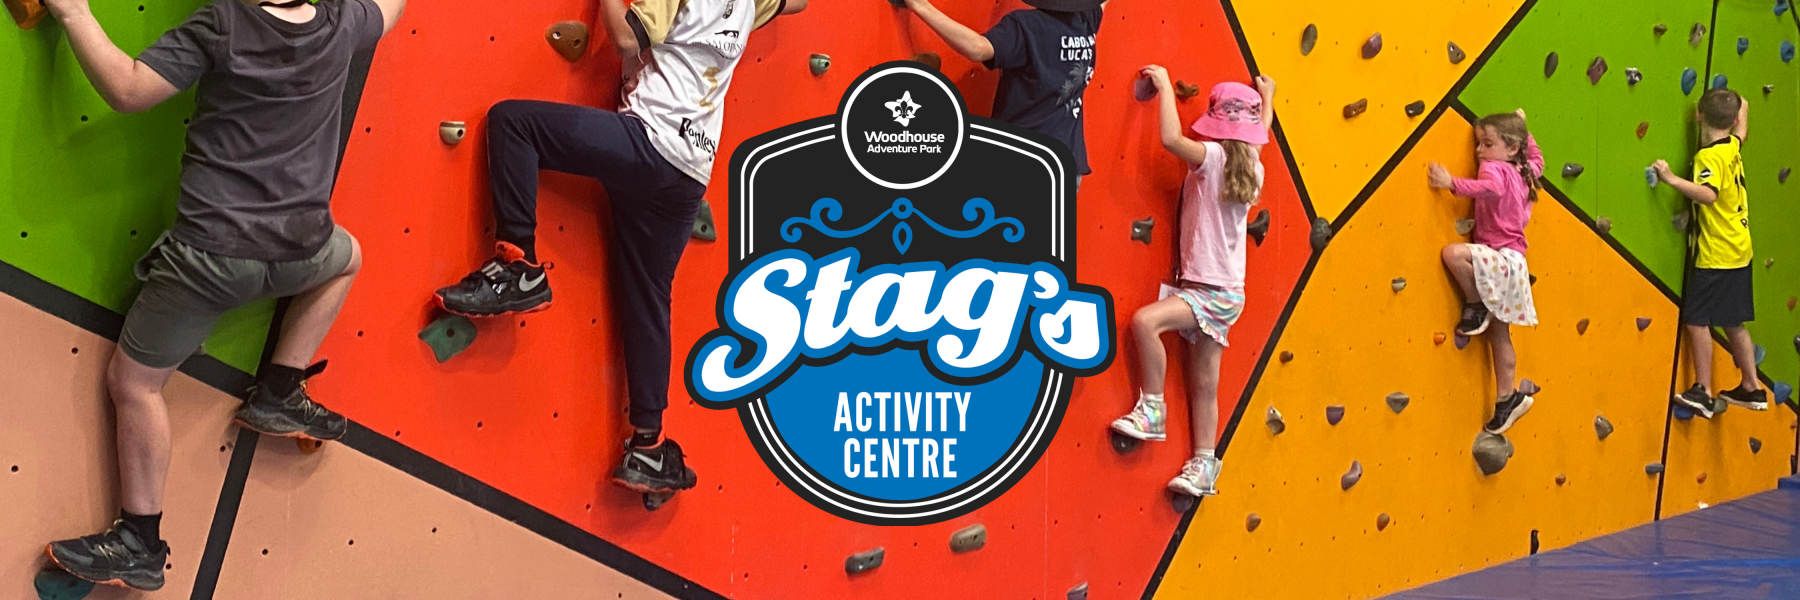 Woodhouse Stags Activity Centre Website Banner